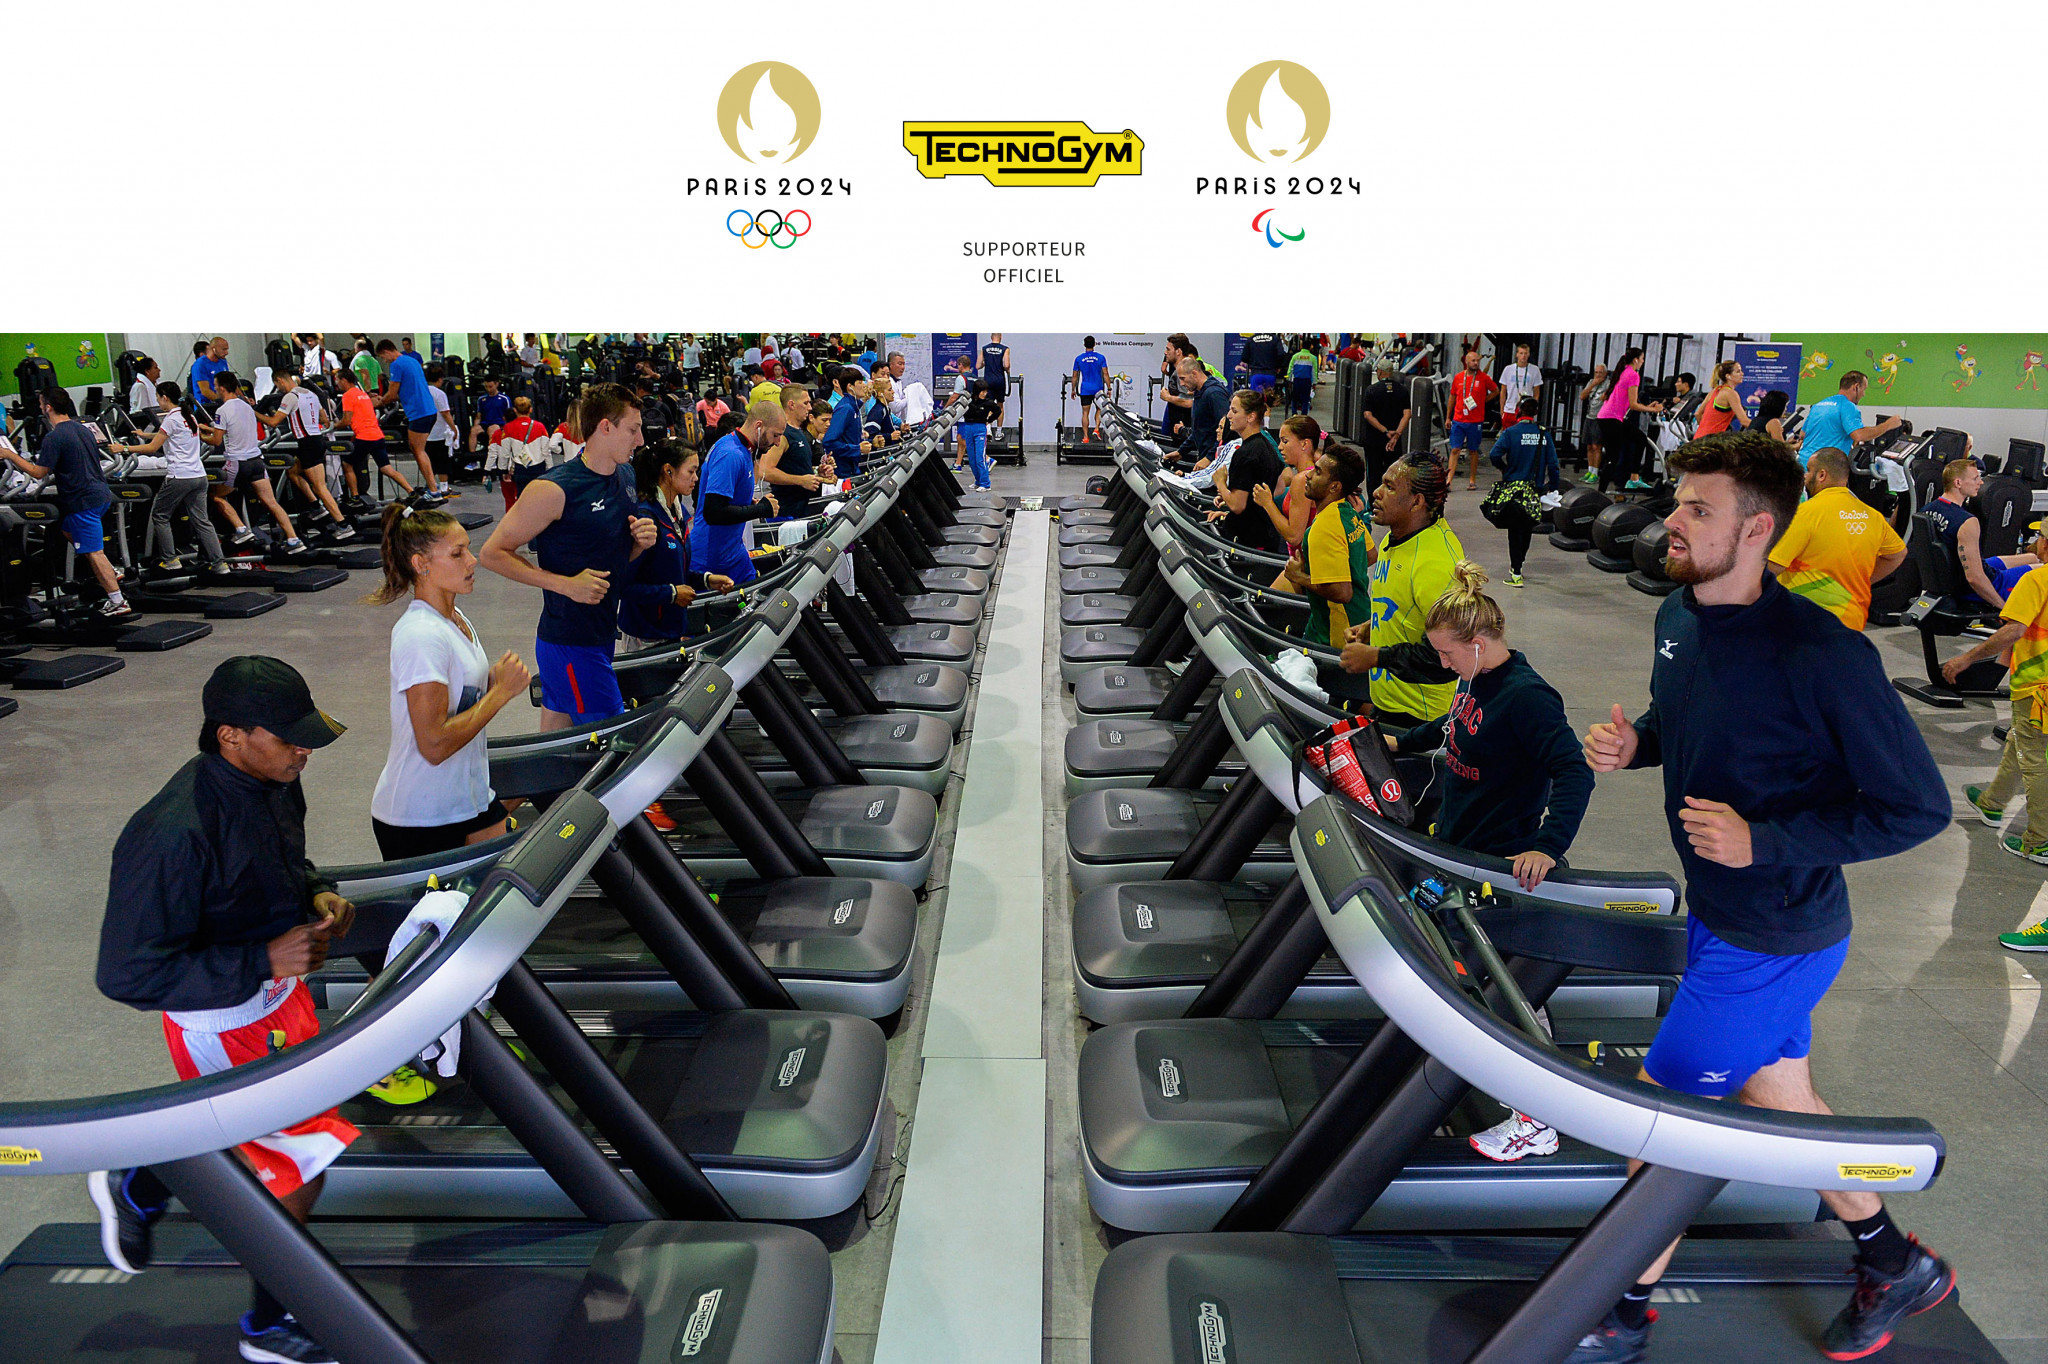 Technogym will provide an estimated 1,200 pieces of fitness kit after signing with Paris 2024 as a partner ©Technogym